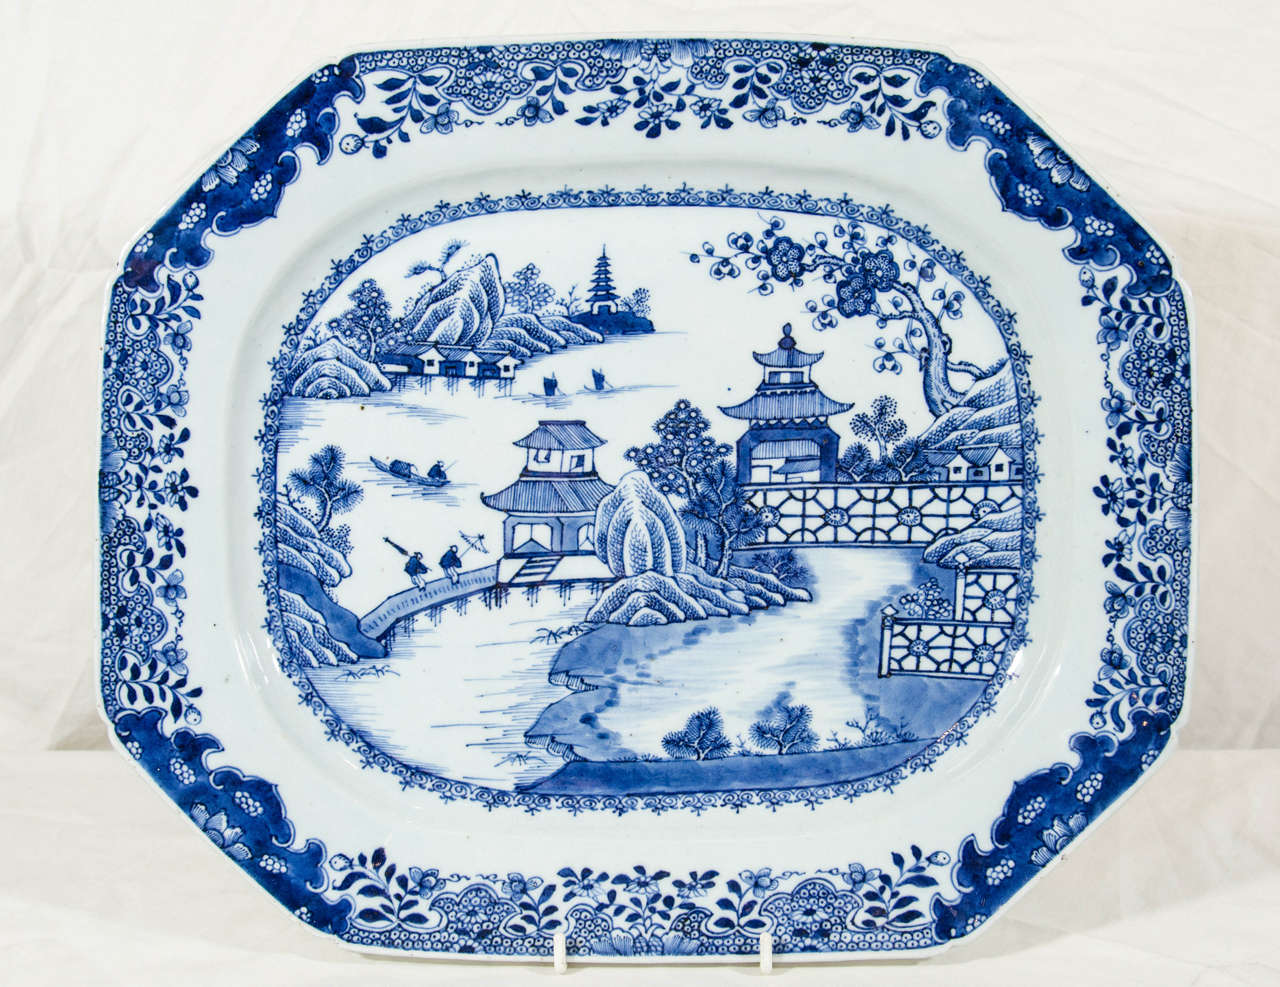 An 18th century Chinese blue and white platter showing pagodas and a waterside scene with two travelers on a bridge.